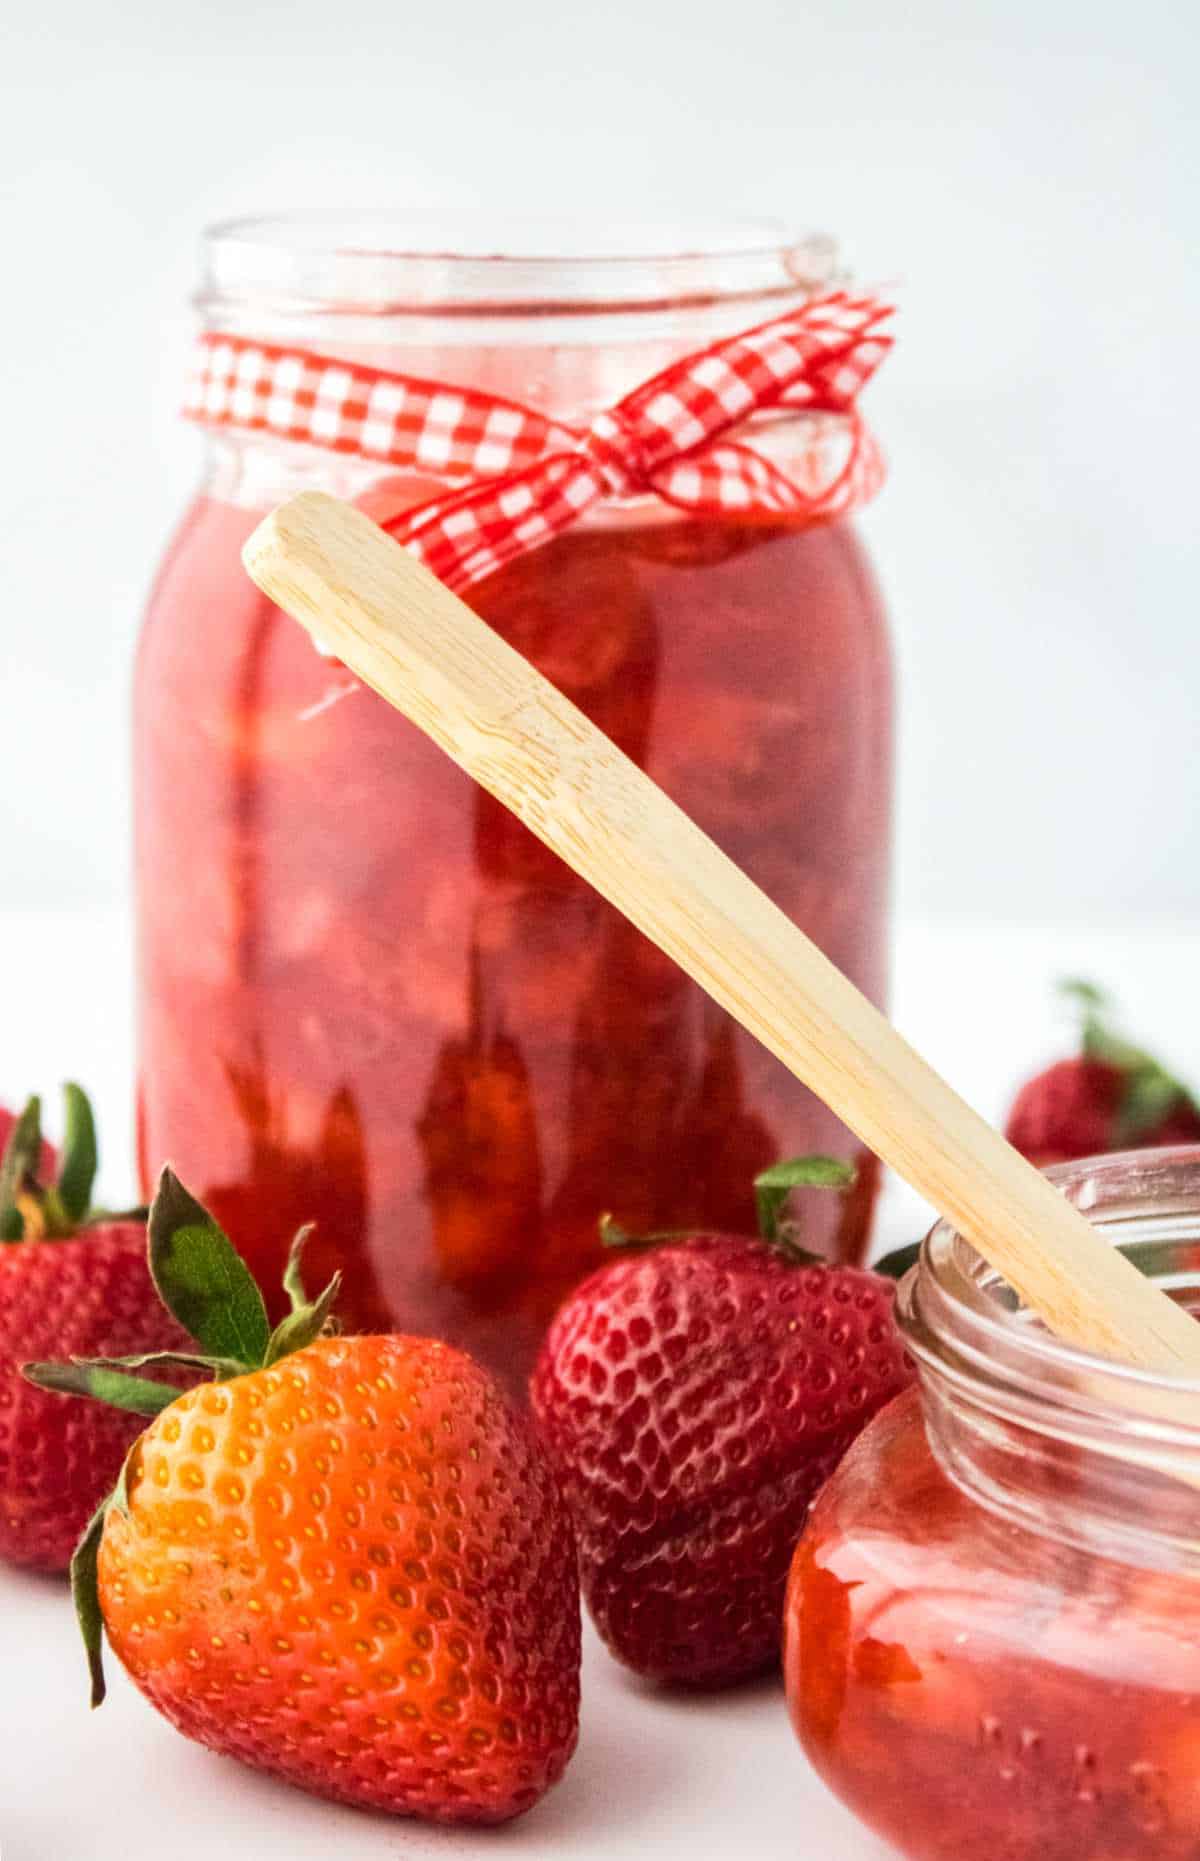 jars of strawberry jam without pectin on a white background.